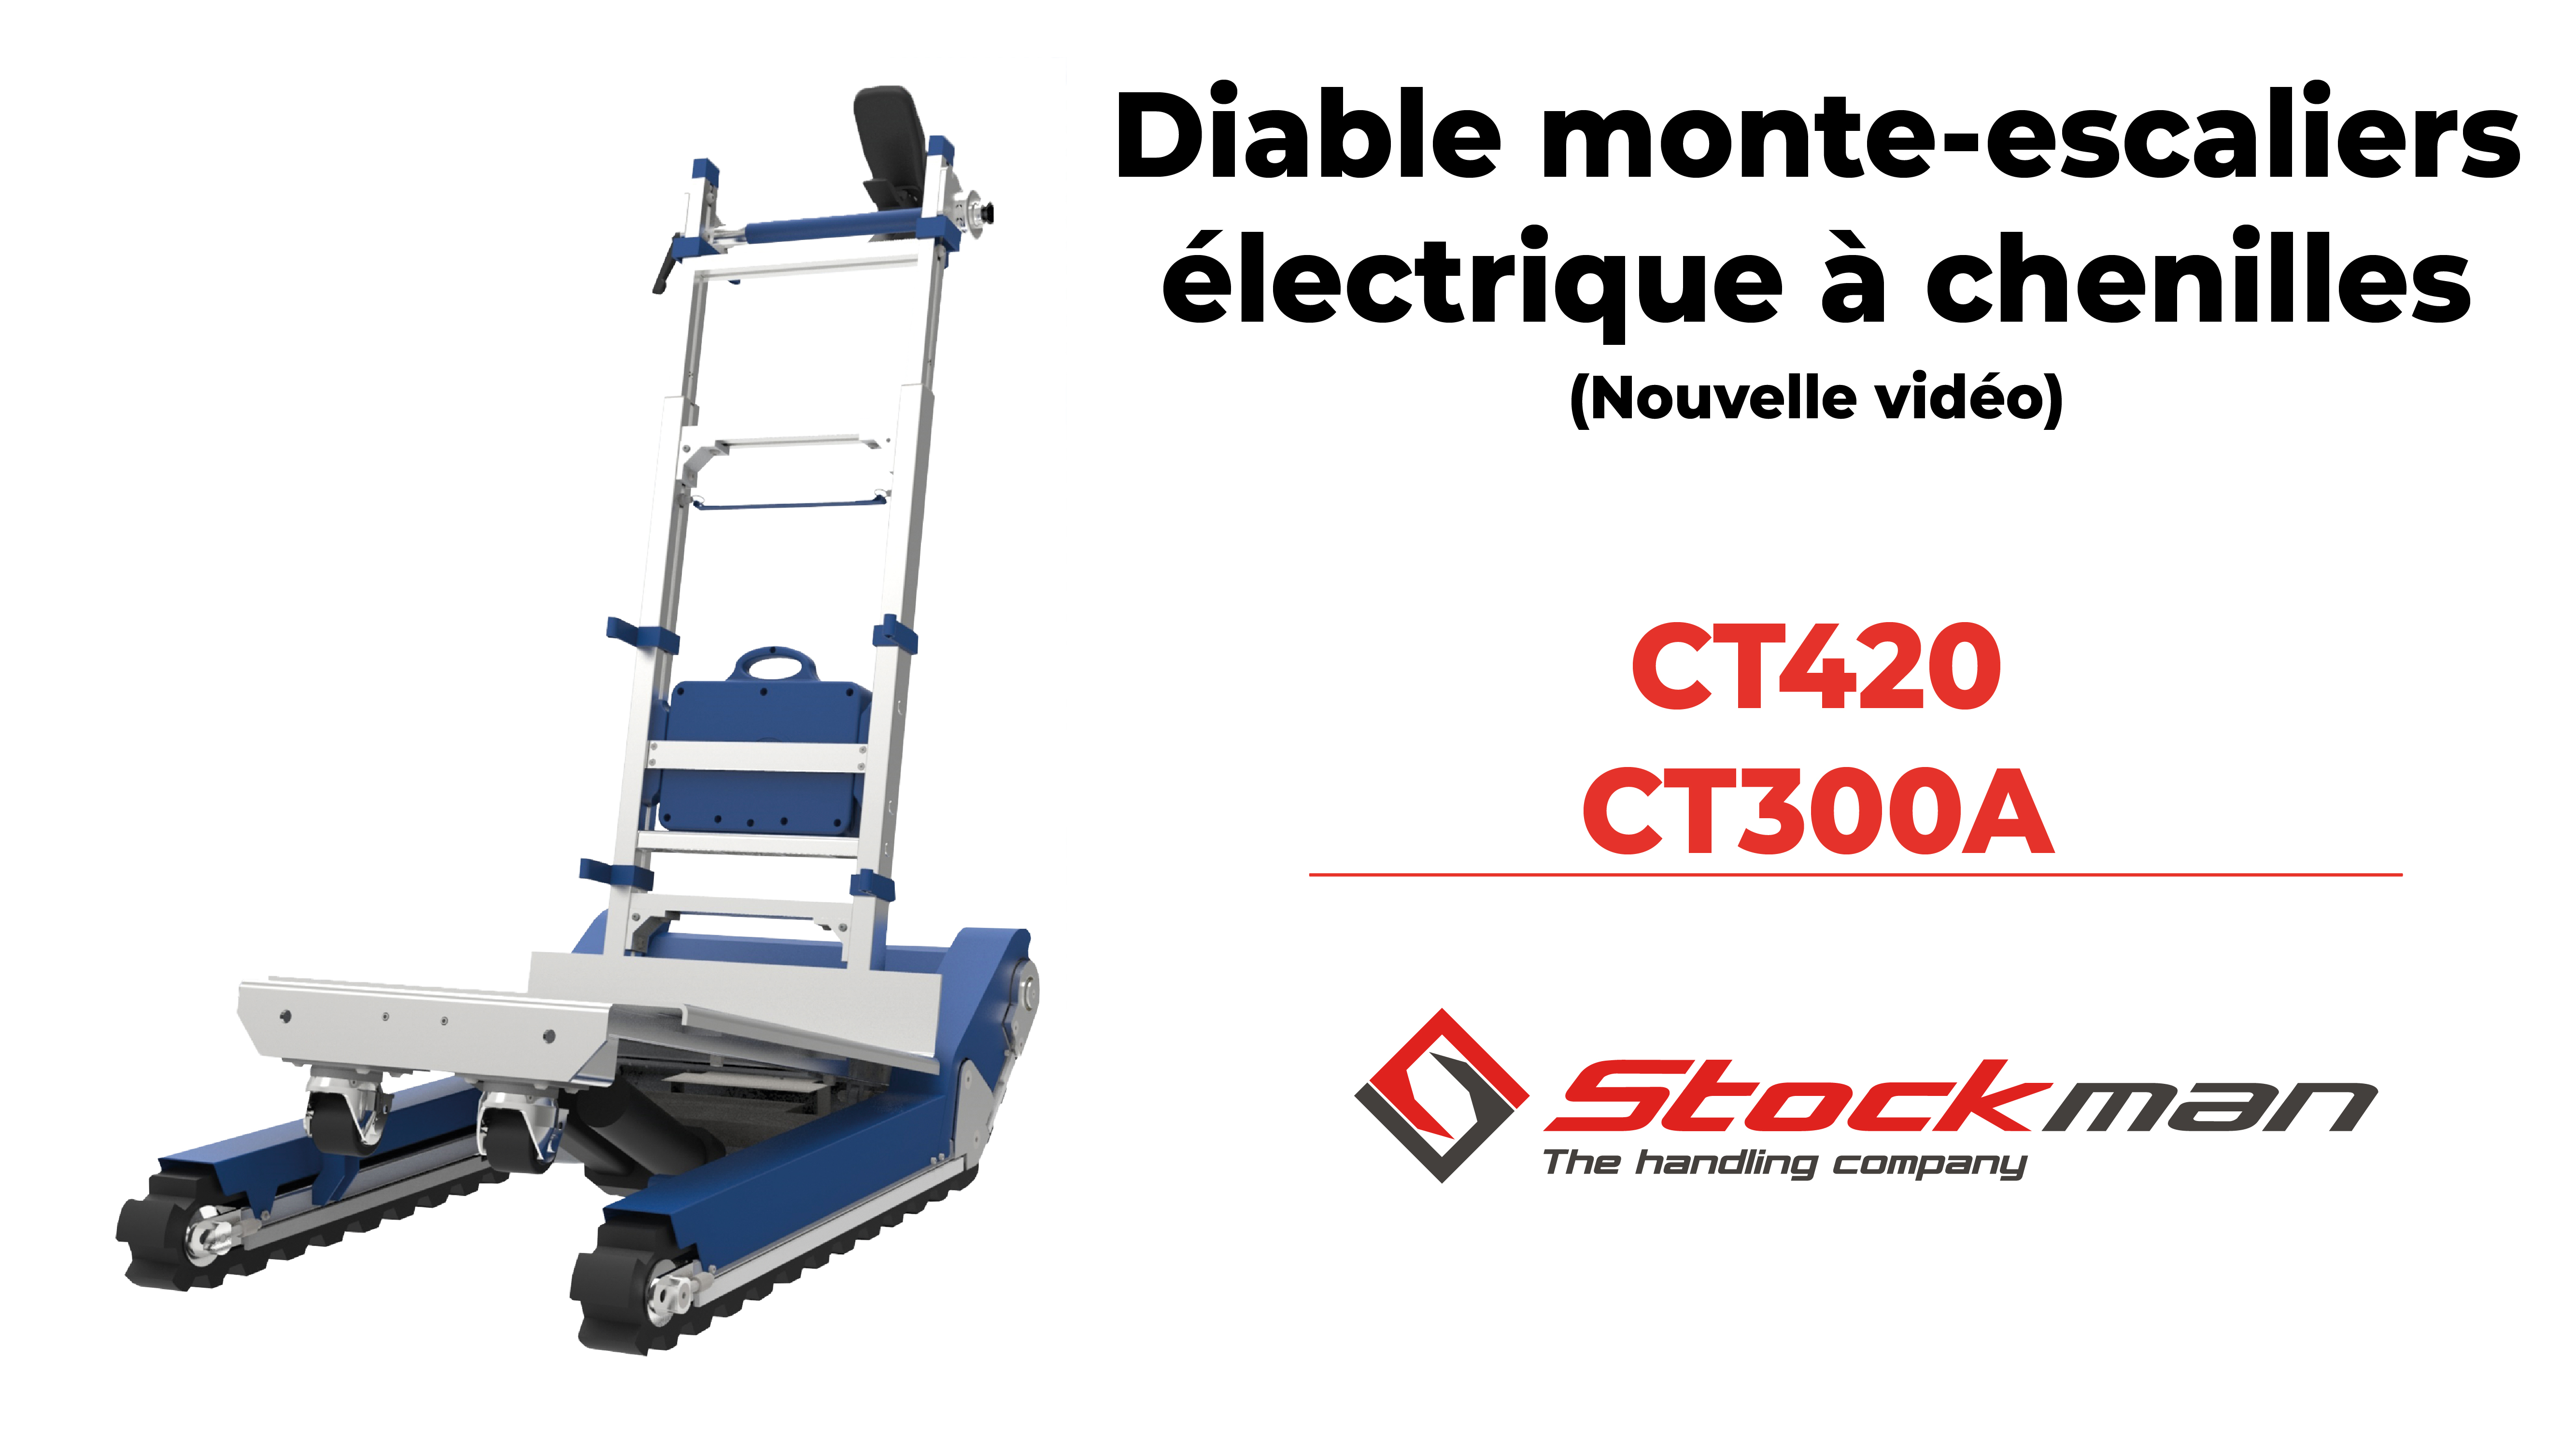 The powered stair climber sack truck 420 and 300 kg : CT420 and CT300A